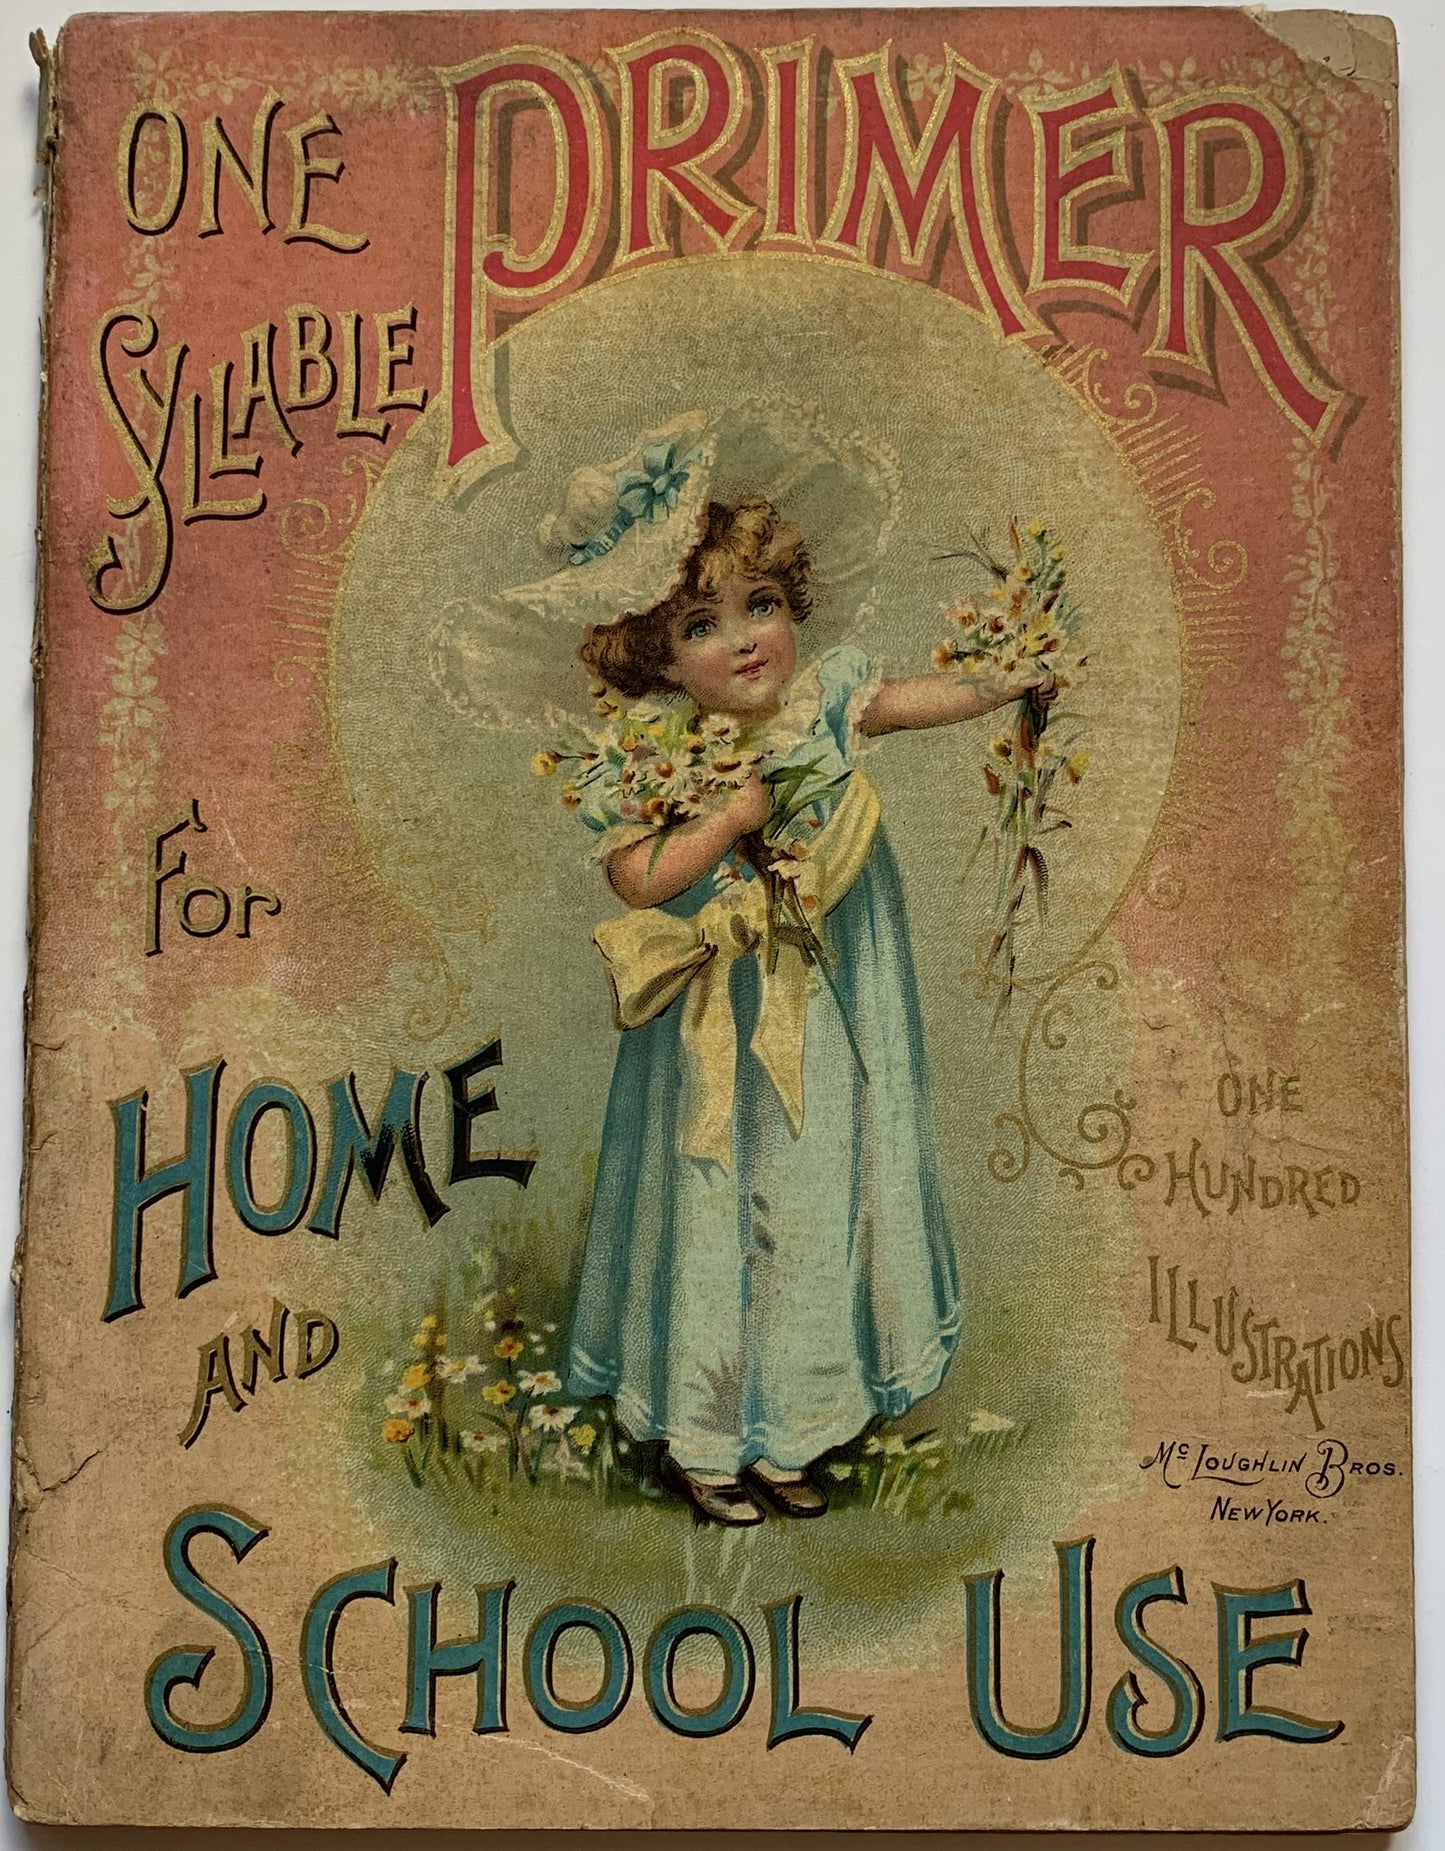 One Syllable Primer for Home and School Use